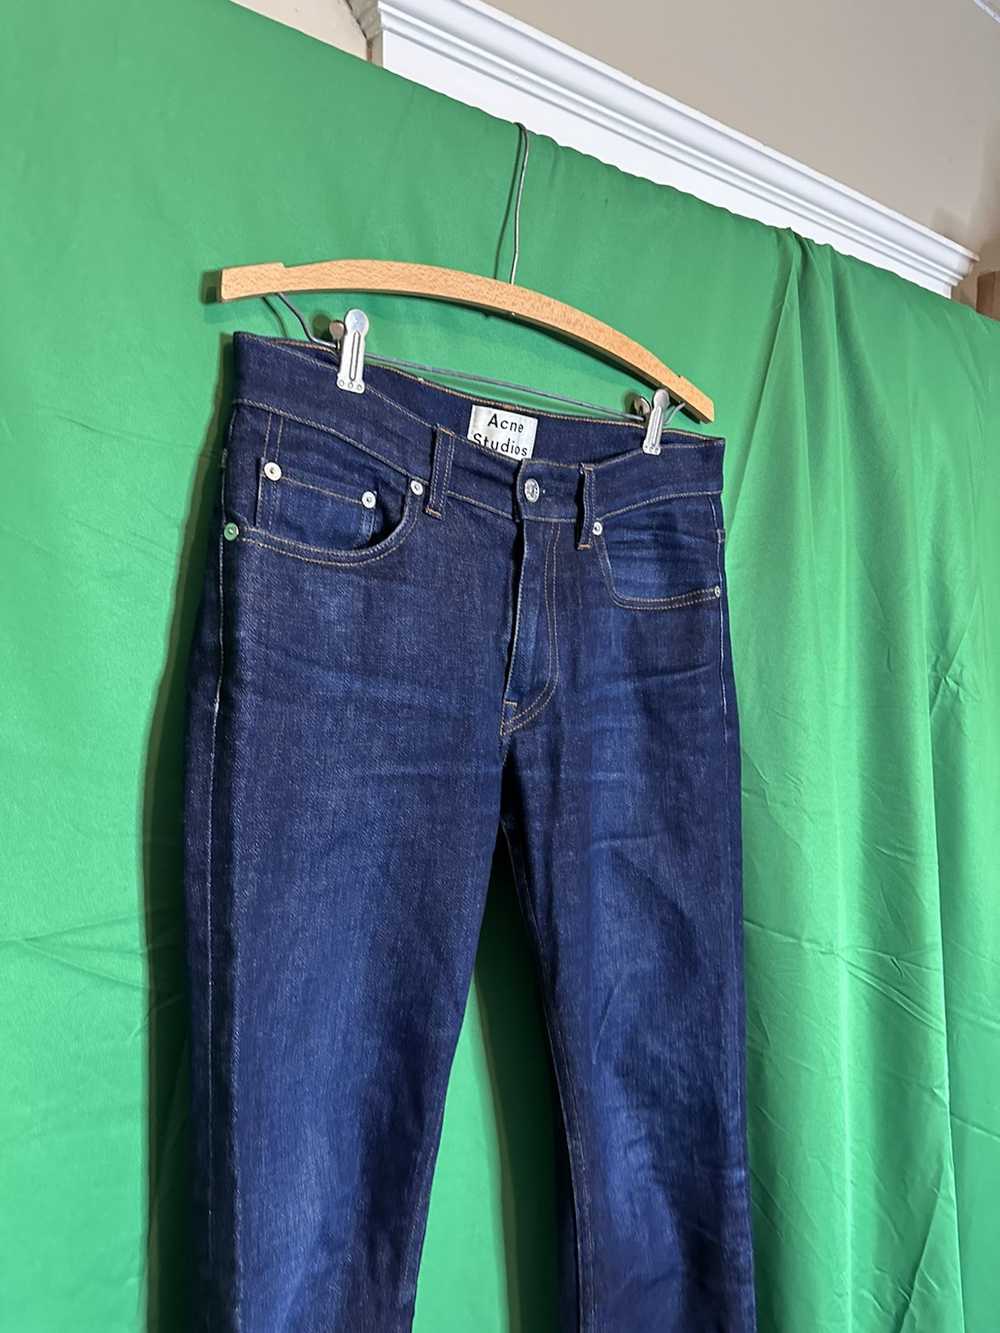 Acne Studios Ace model slim blue jeans made in It… - image 2